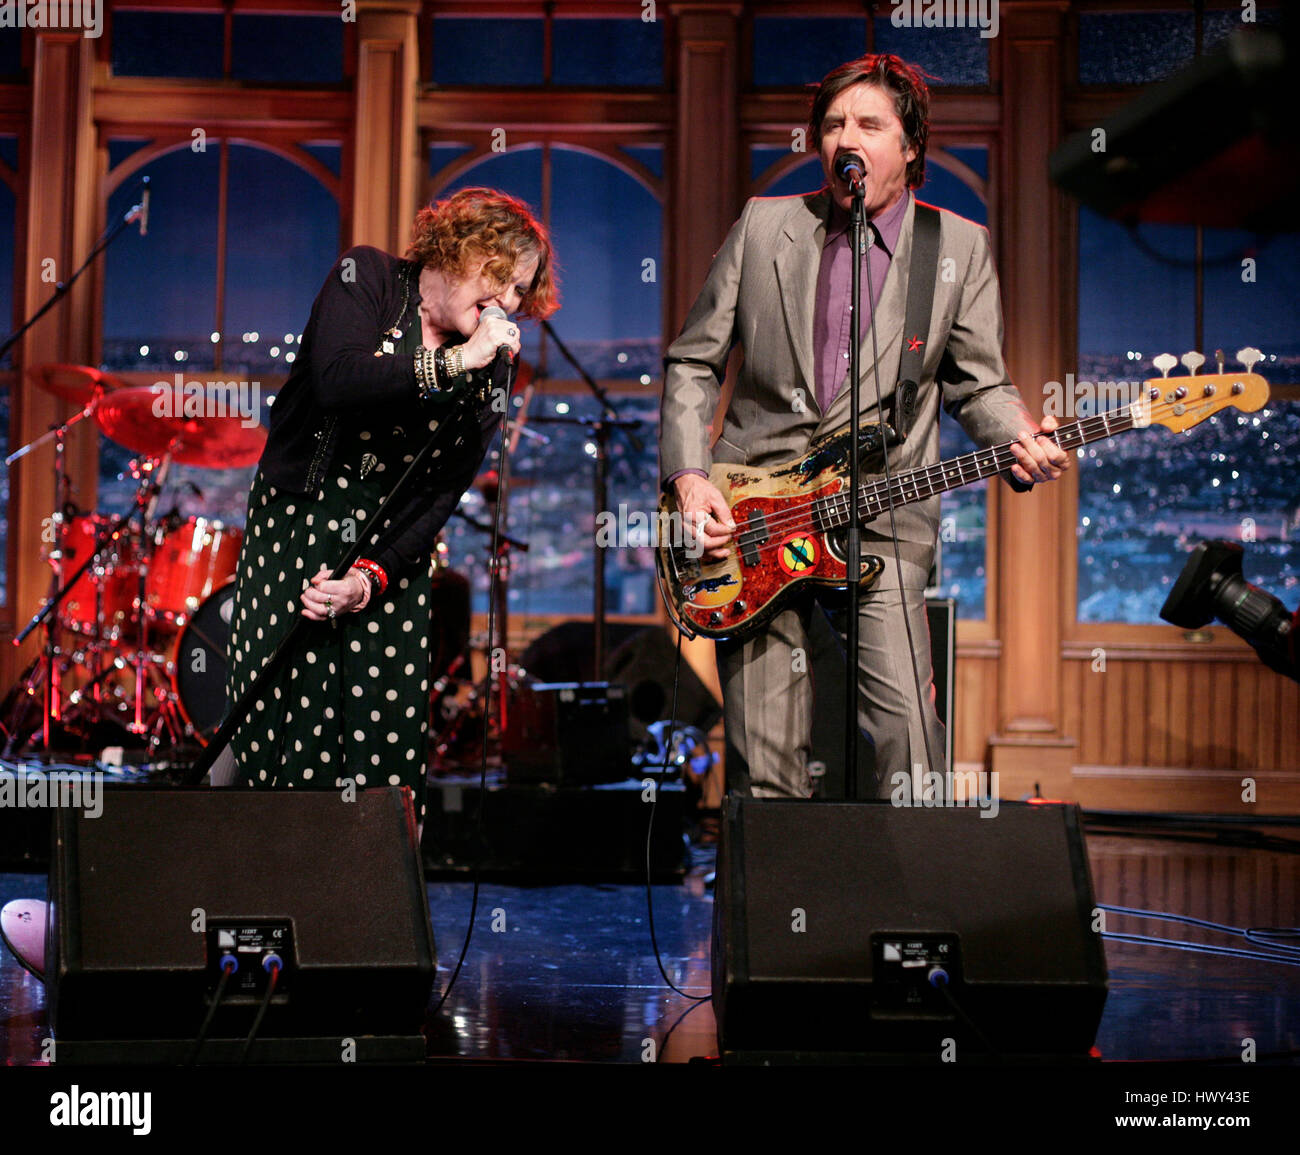 The punk band, 'X', with band members Exene Cervenka, on lead vocals, and John Doe on bass guitar perform during a segment of 'The Late Late Show with Craig Ferguson' at CBS Television City on Oct. 27, 2008 in Los Angeles, California. Photo by Francis Specker Stock Photo